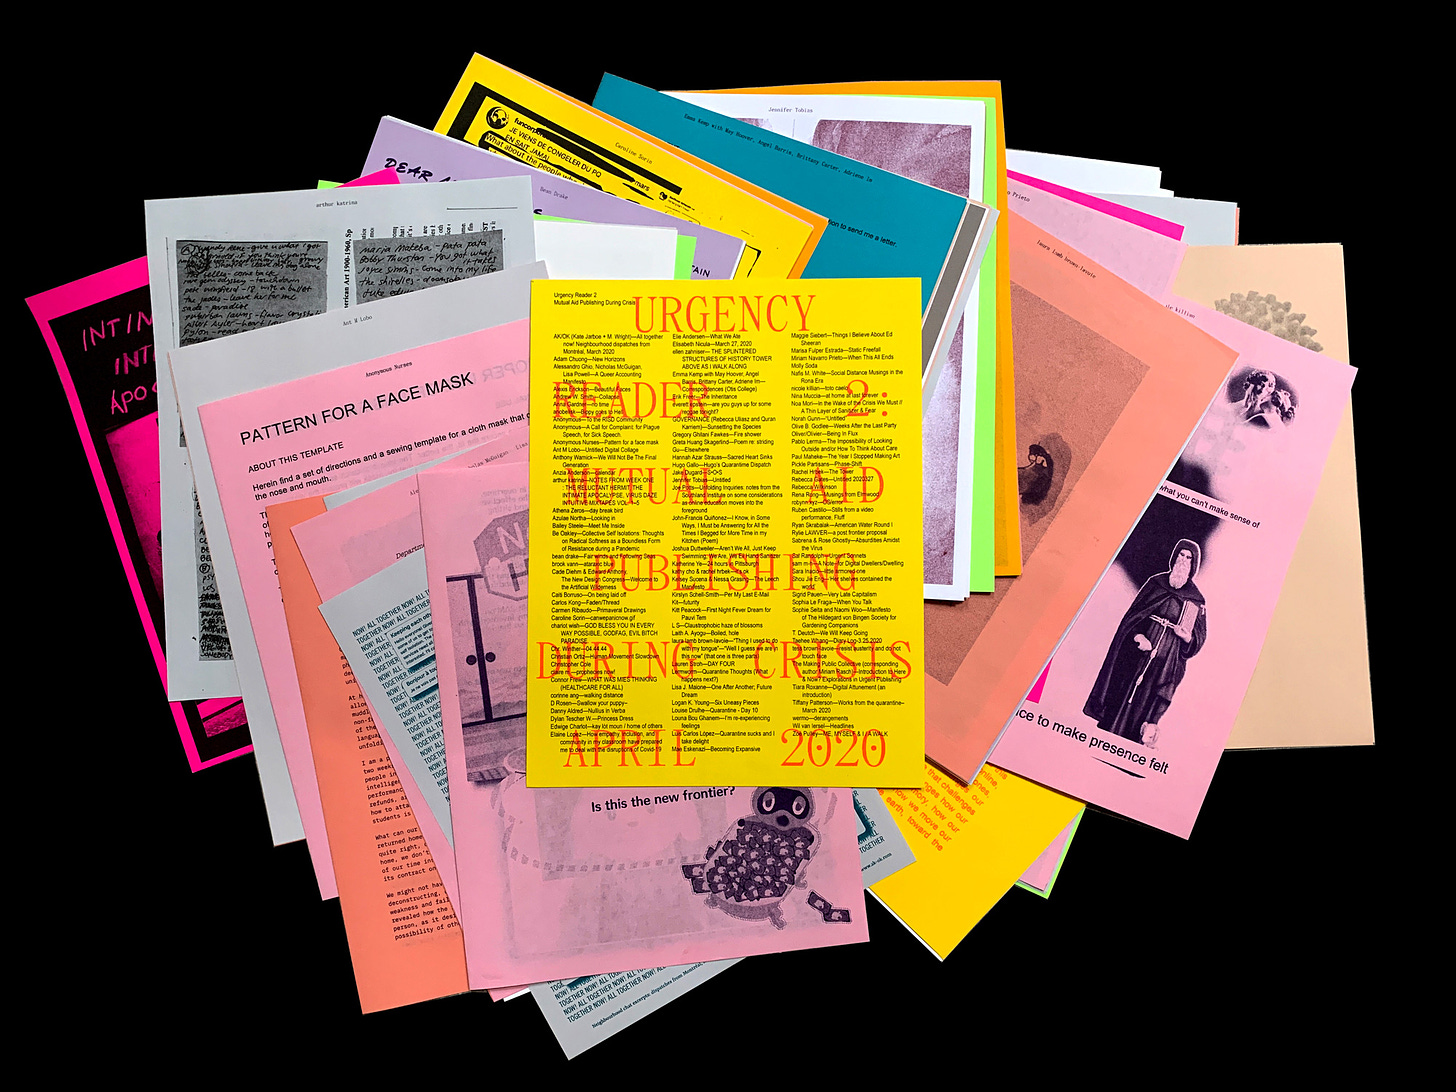 An array of multicolored printed pages with text and images are spread out on a black background. Text on the top page reads URGENCY READER 2: MUTUAL AID PUBLISHING DURING CRISIS. 